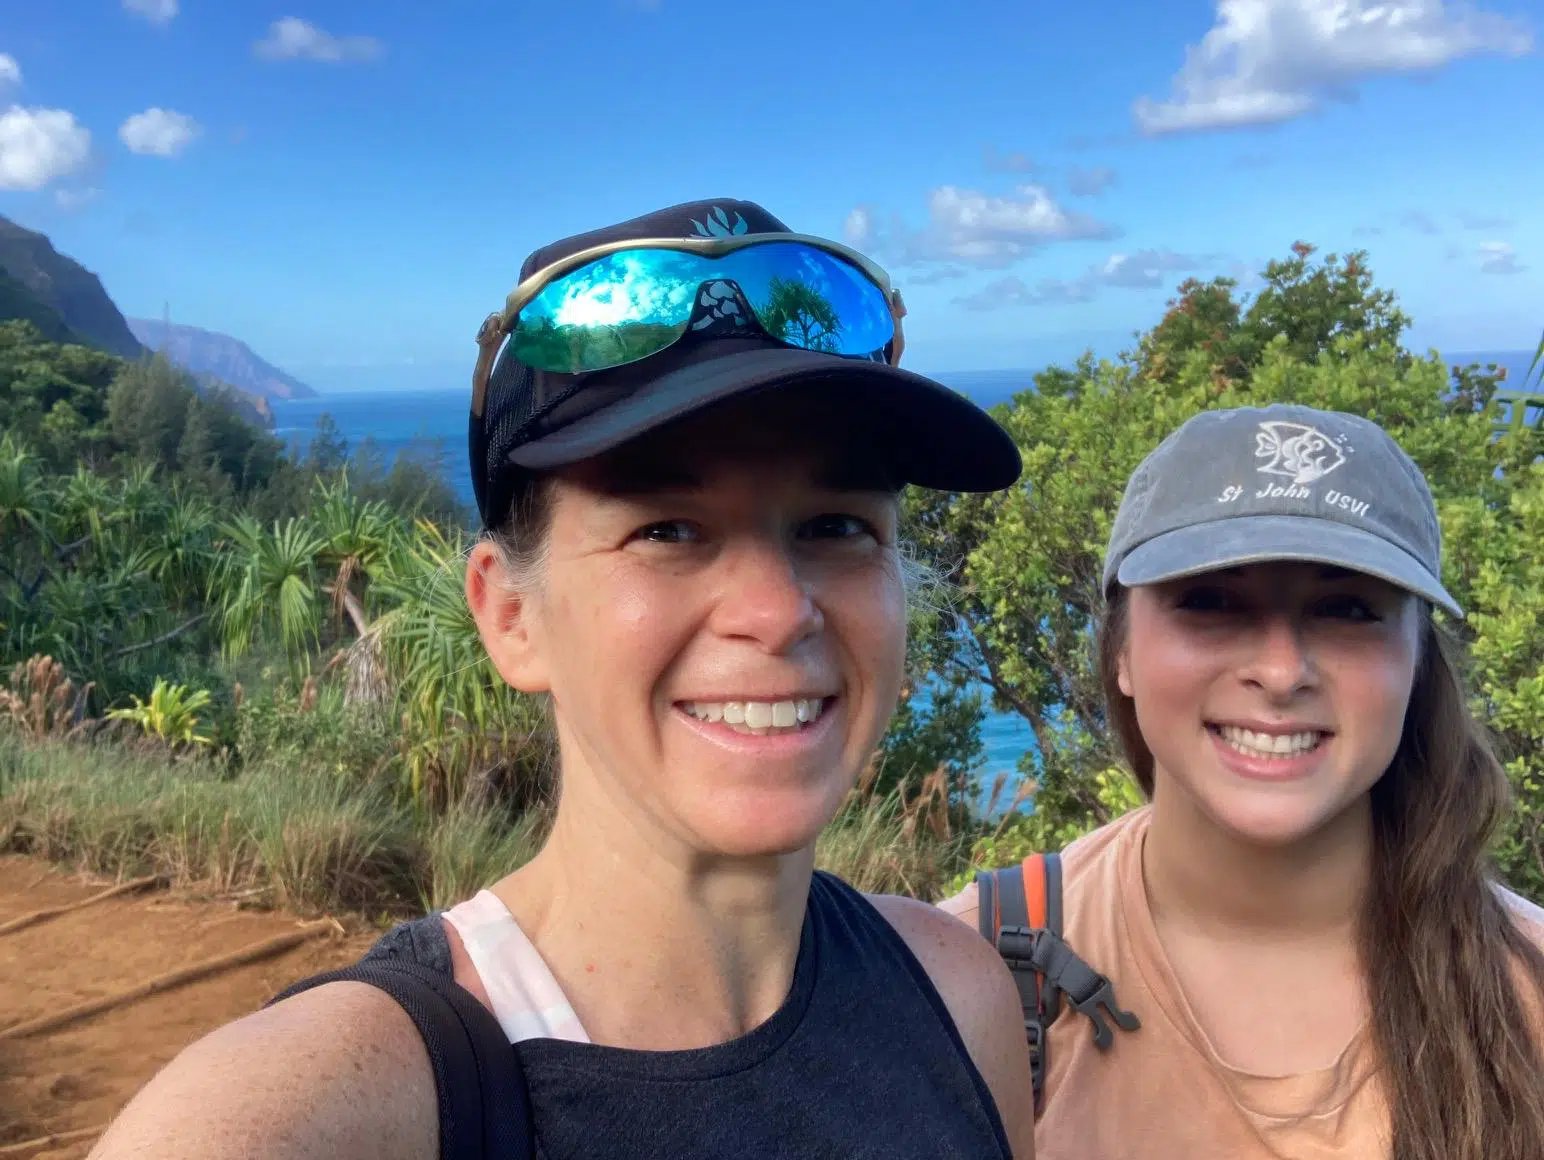 My cousin and I early on the Kalalau Trail